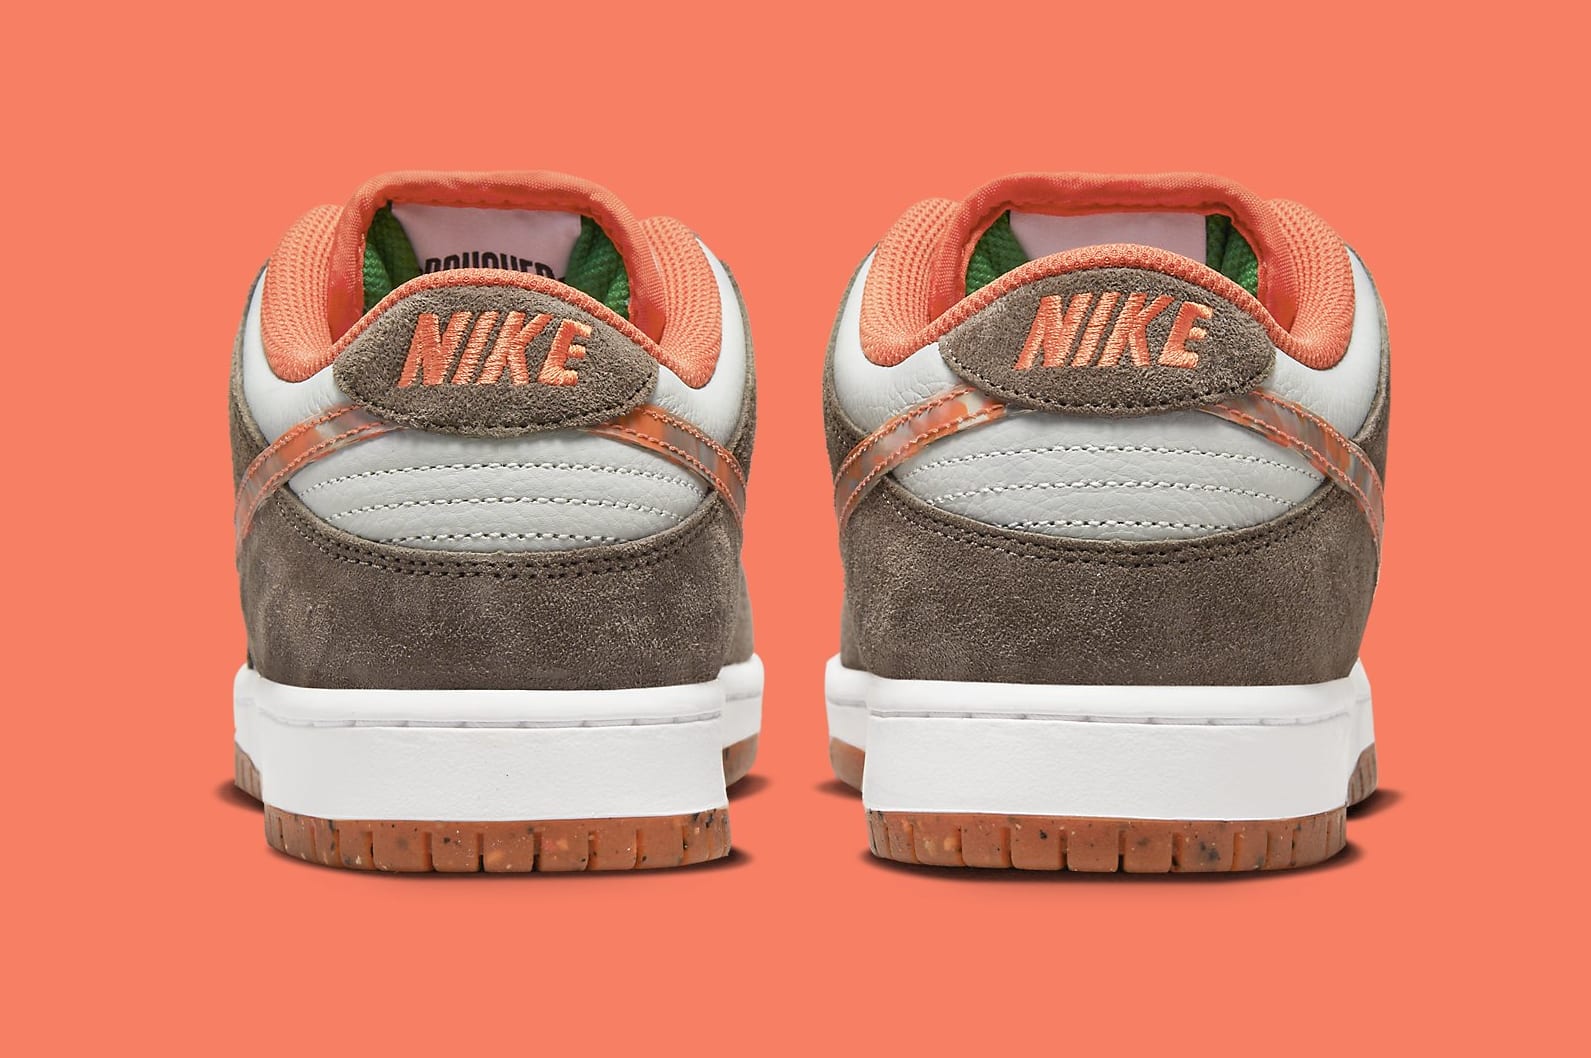 Crushed Skate Shop x Nike SB Dunk Low Release Date DH7782 001